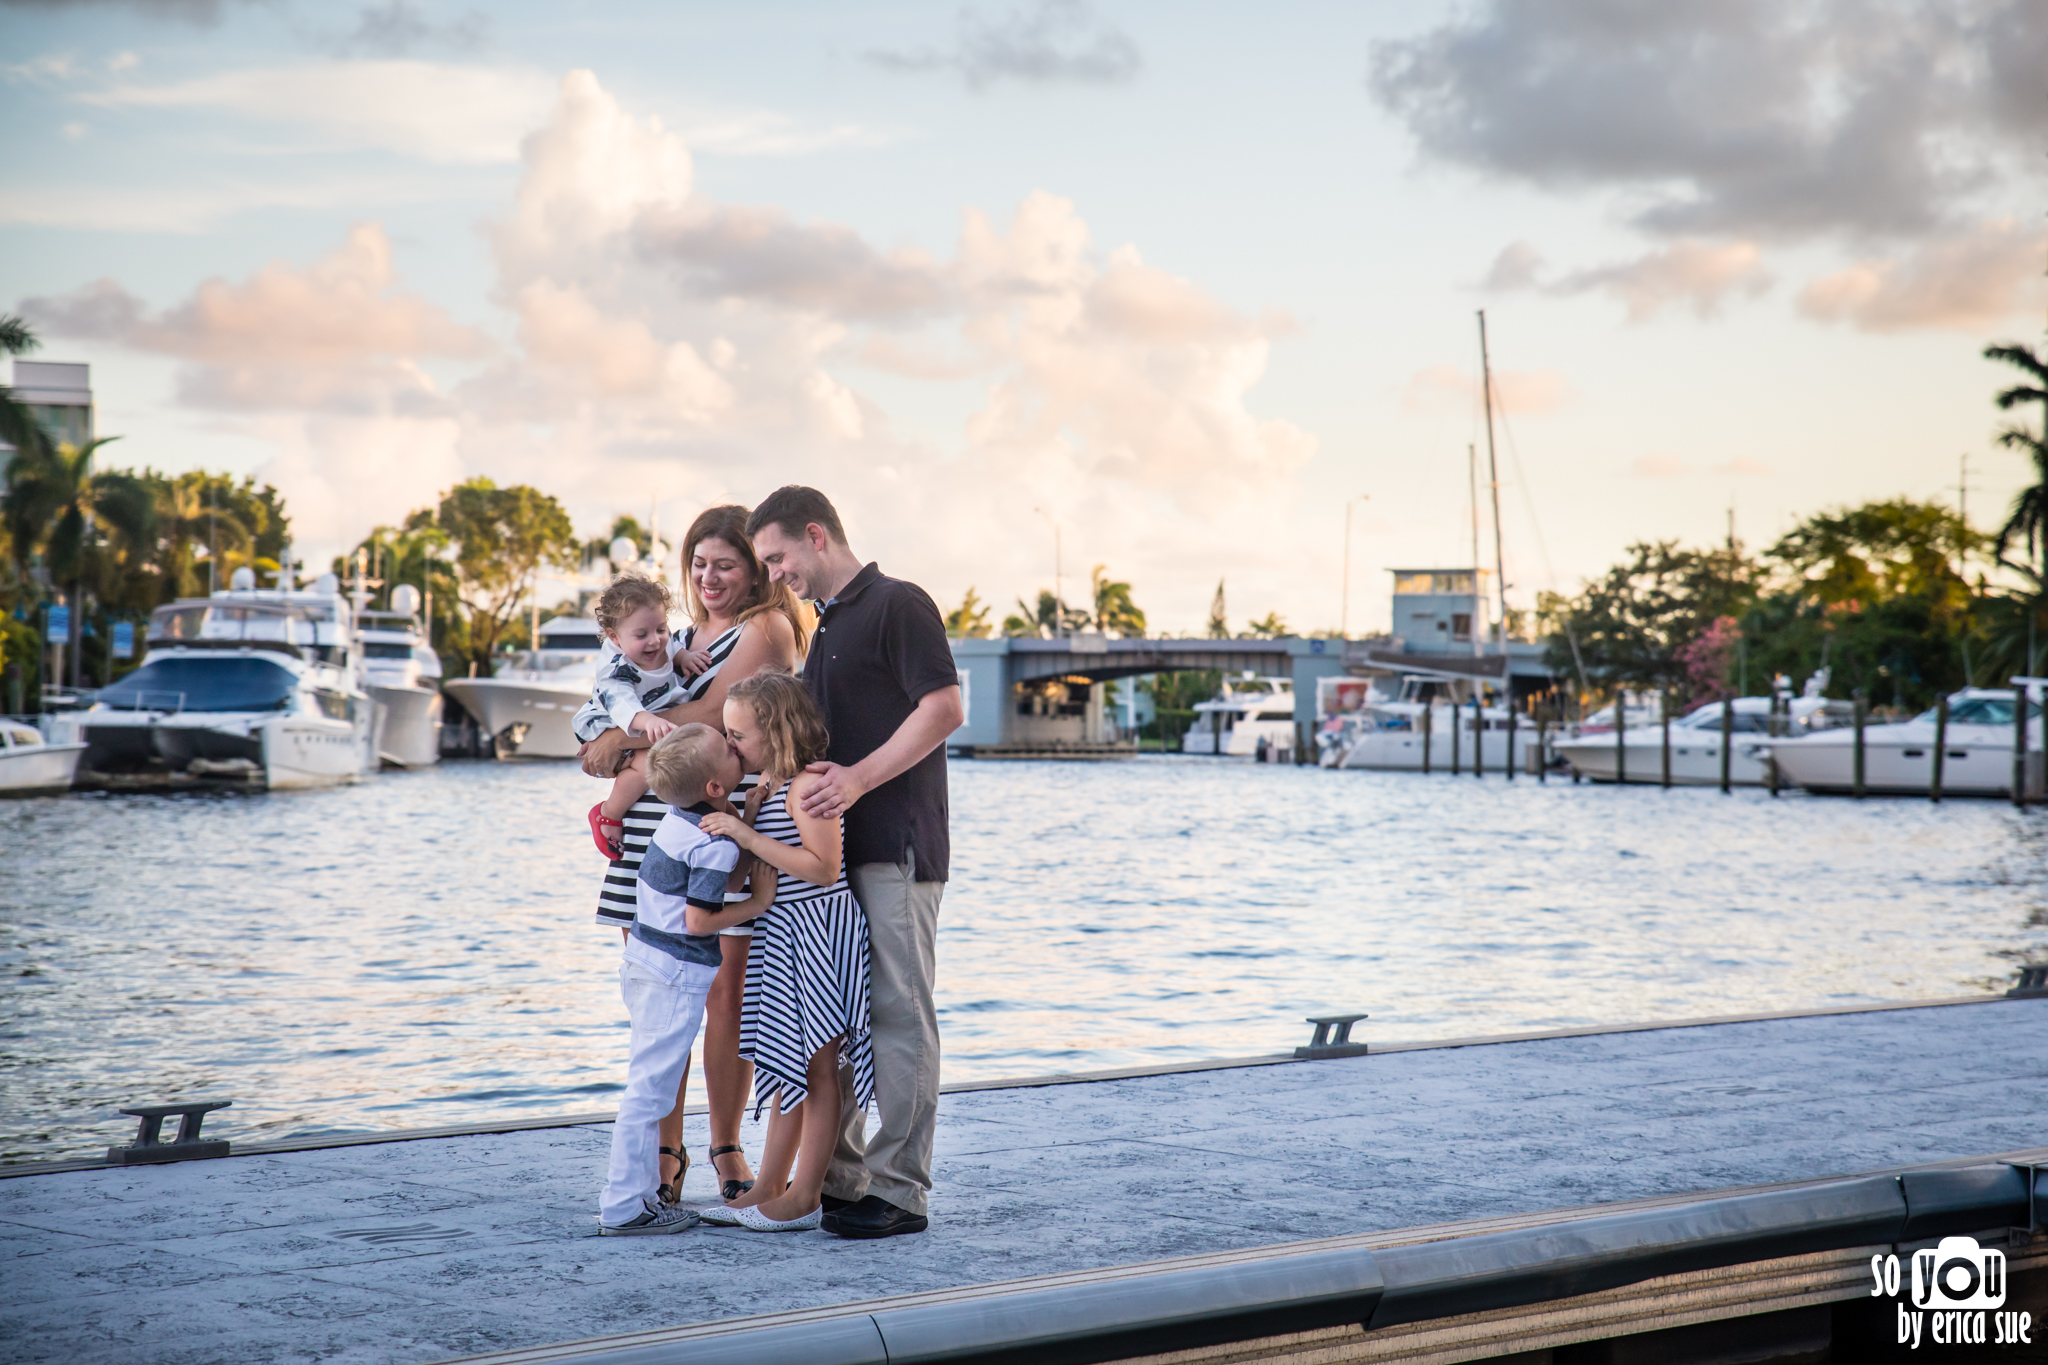 ft-lauderdale-lifestyle-family-photography-so-you-by-erica-sue-0540.jpg